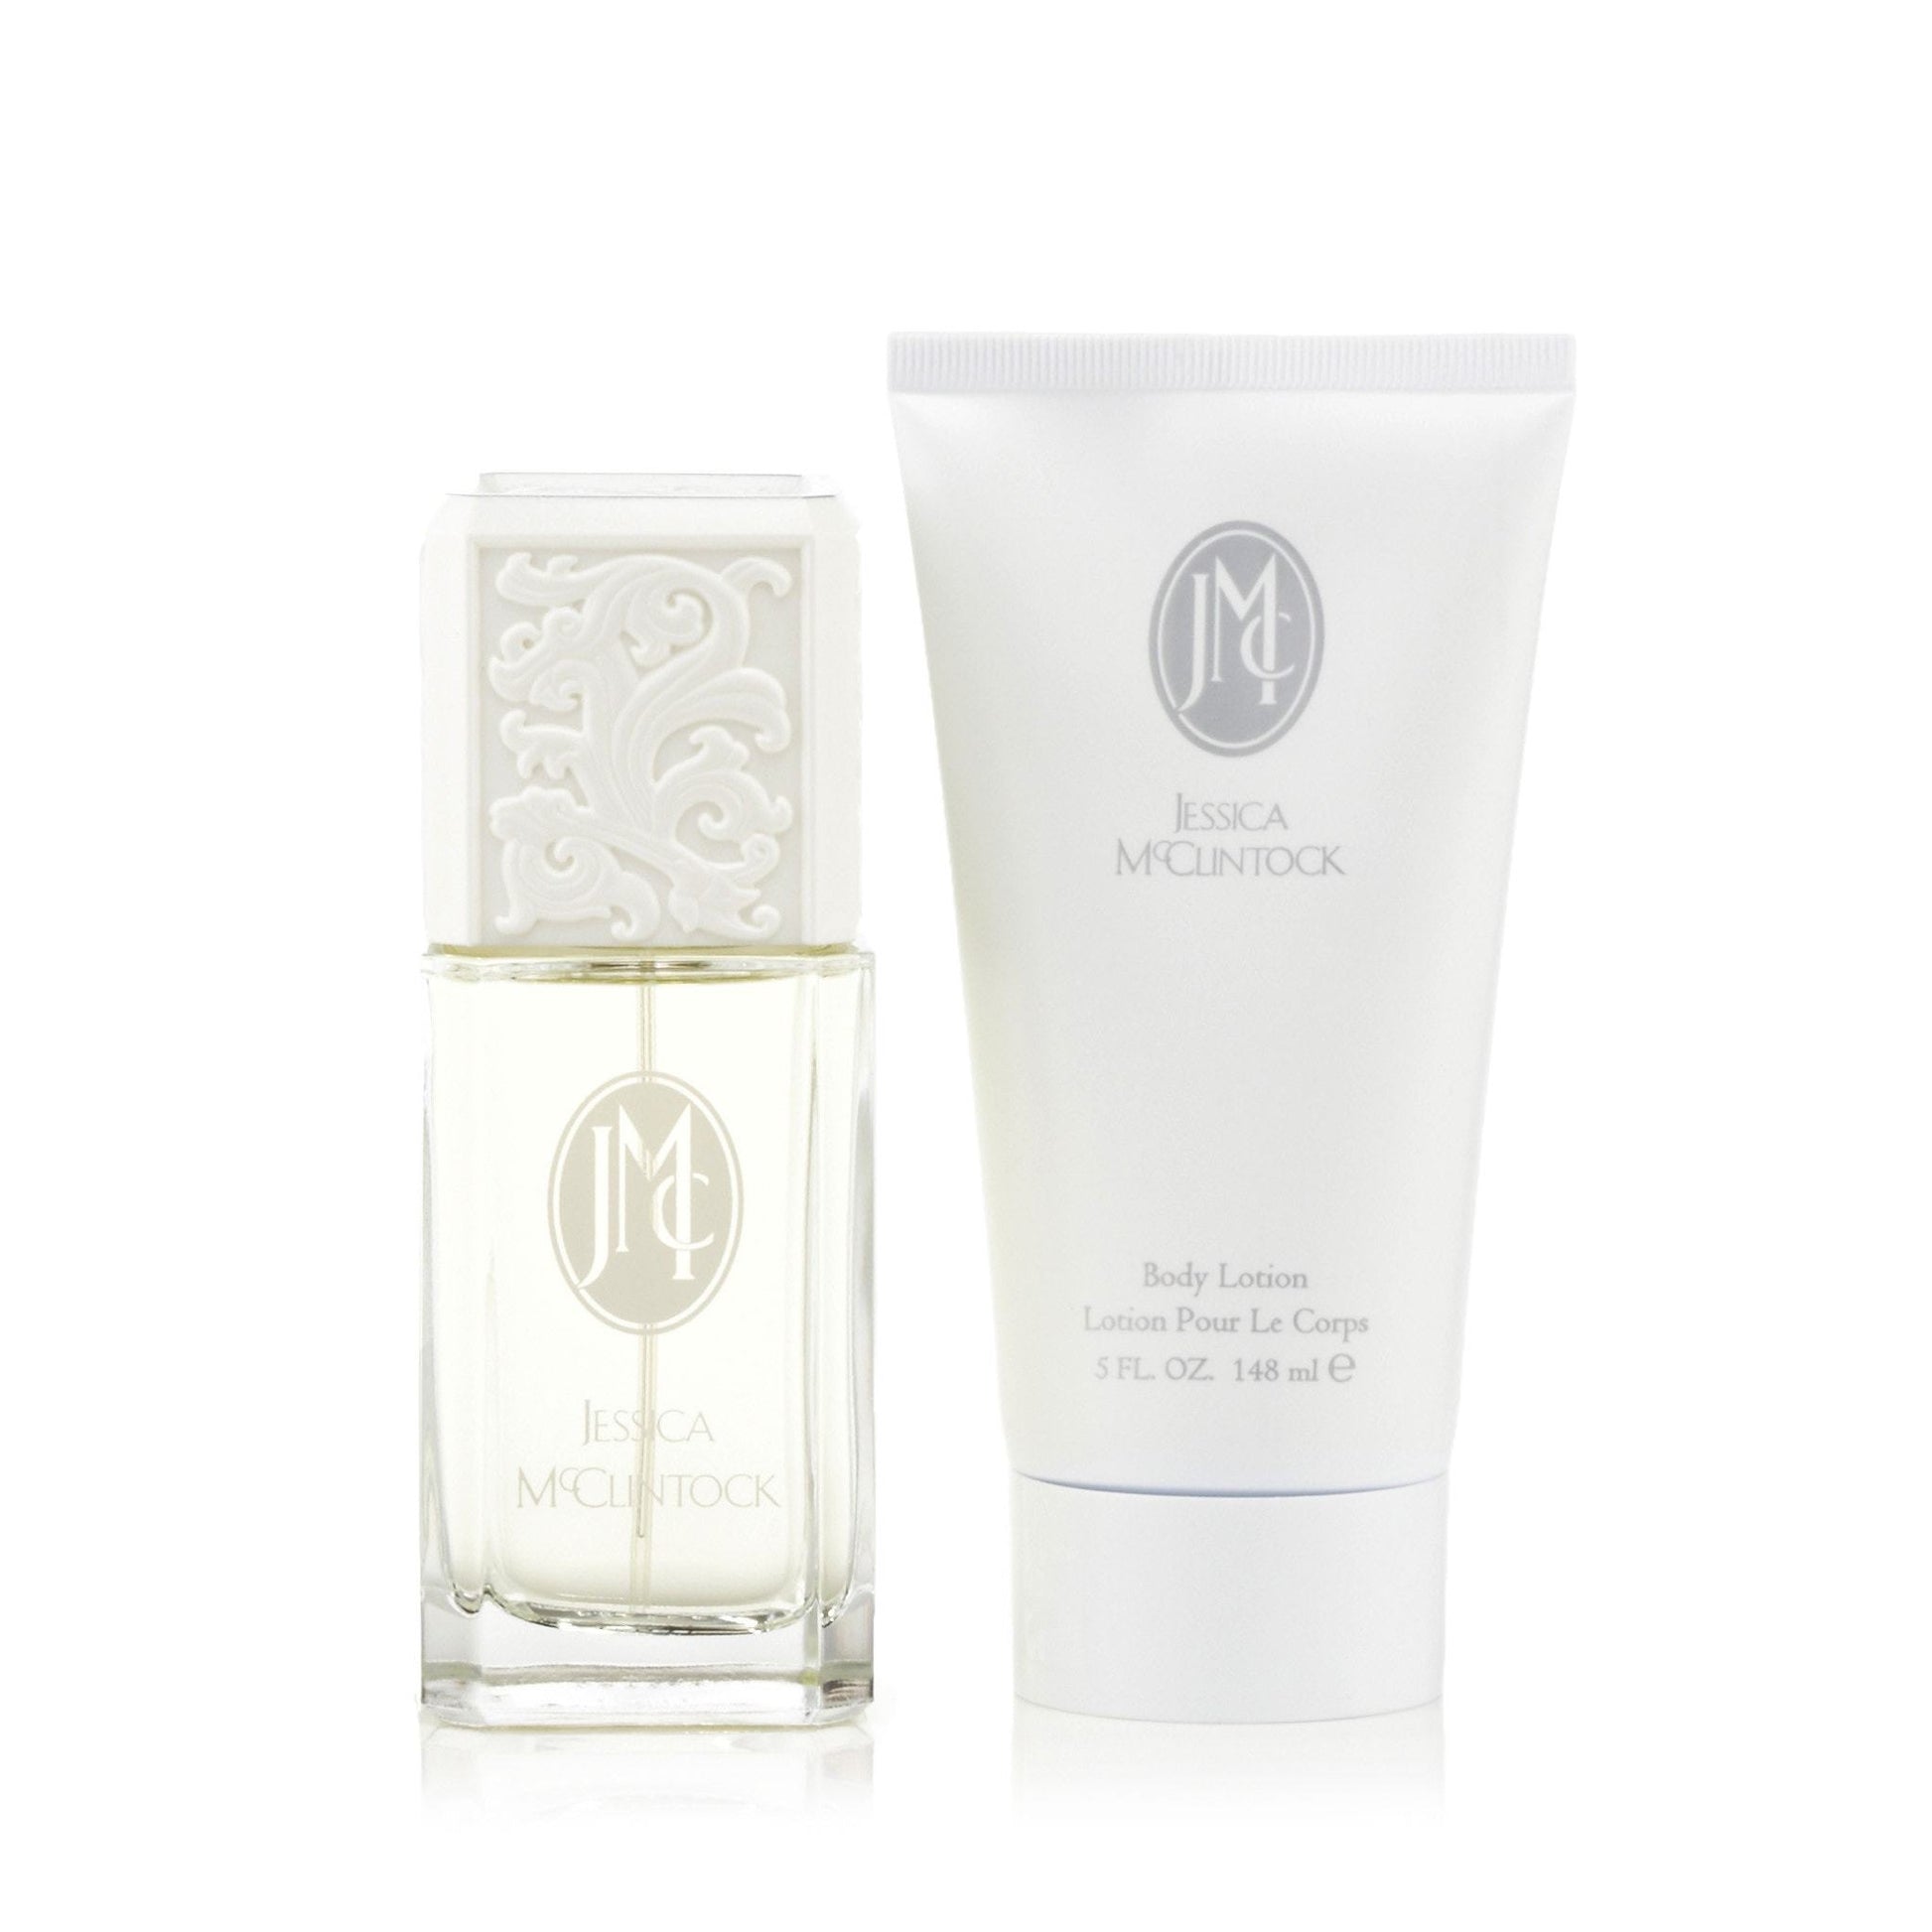 Jessica Mcclintock Gift Set for Women by Jessica McClintock, Product image 1